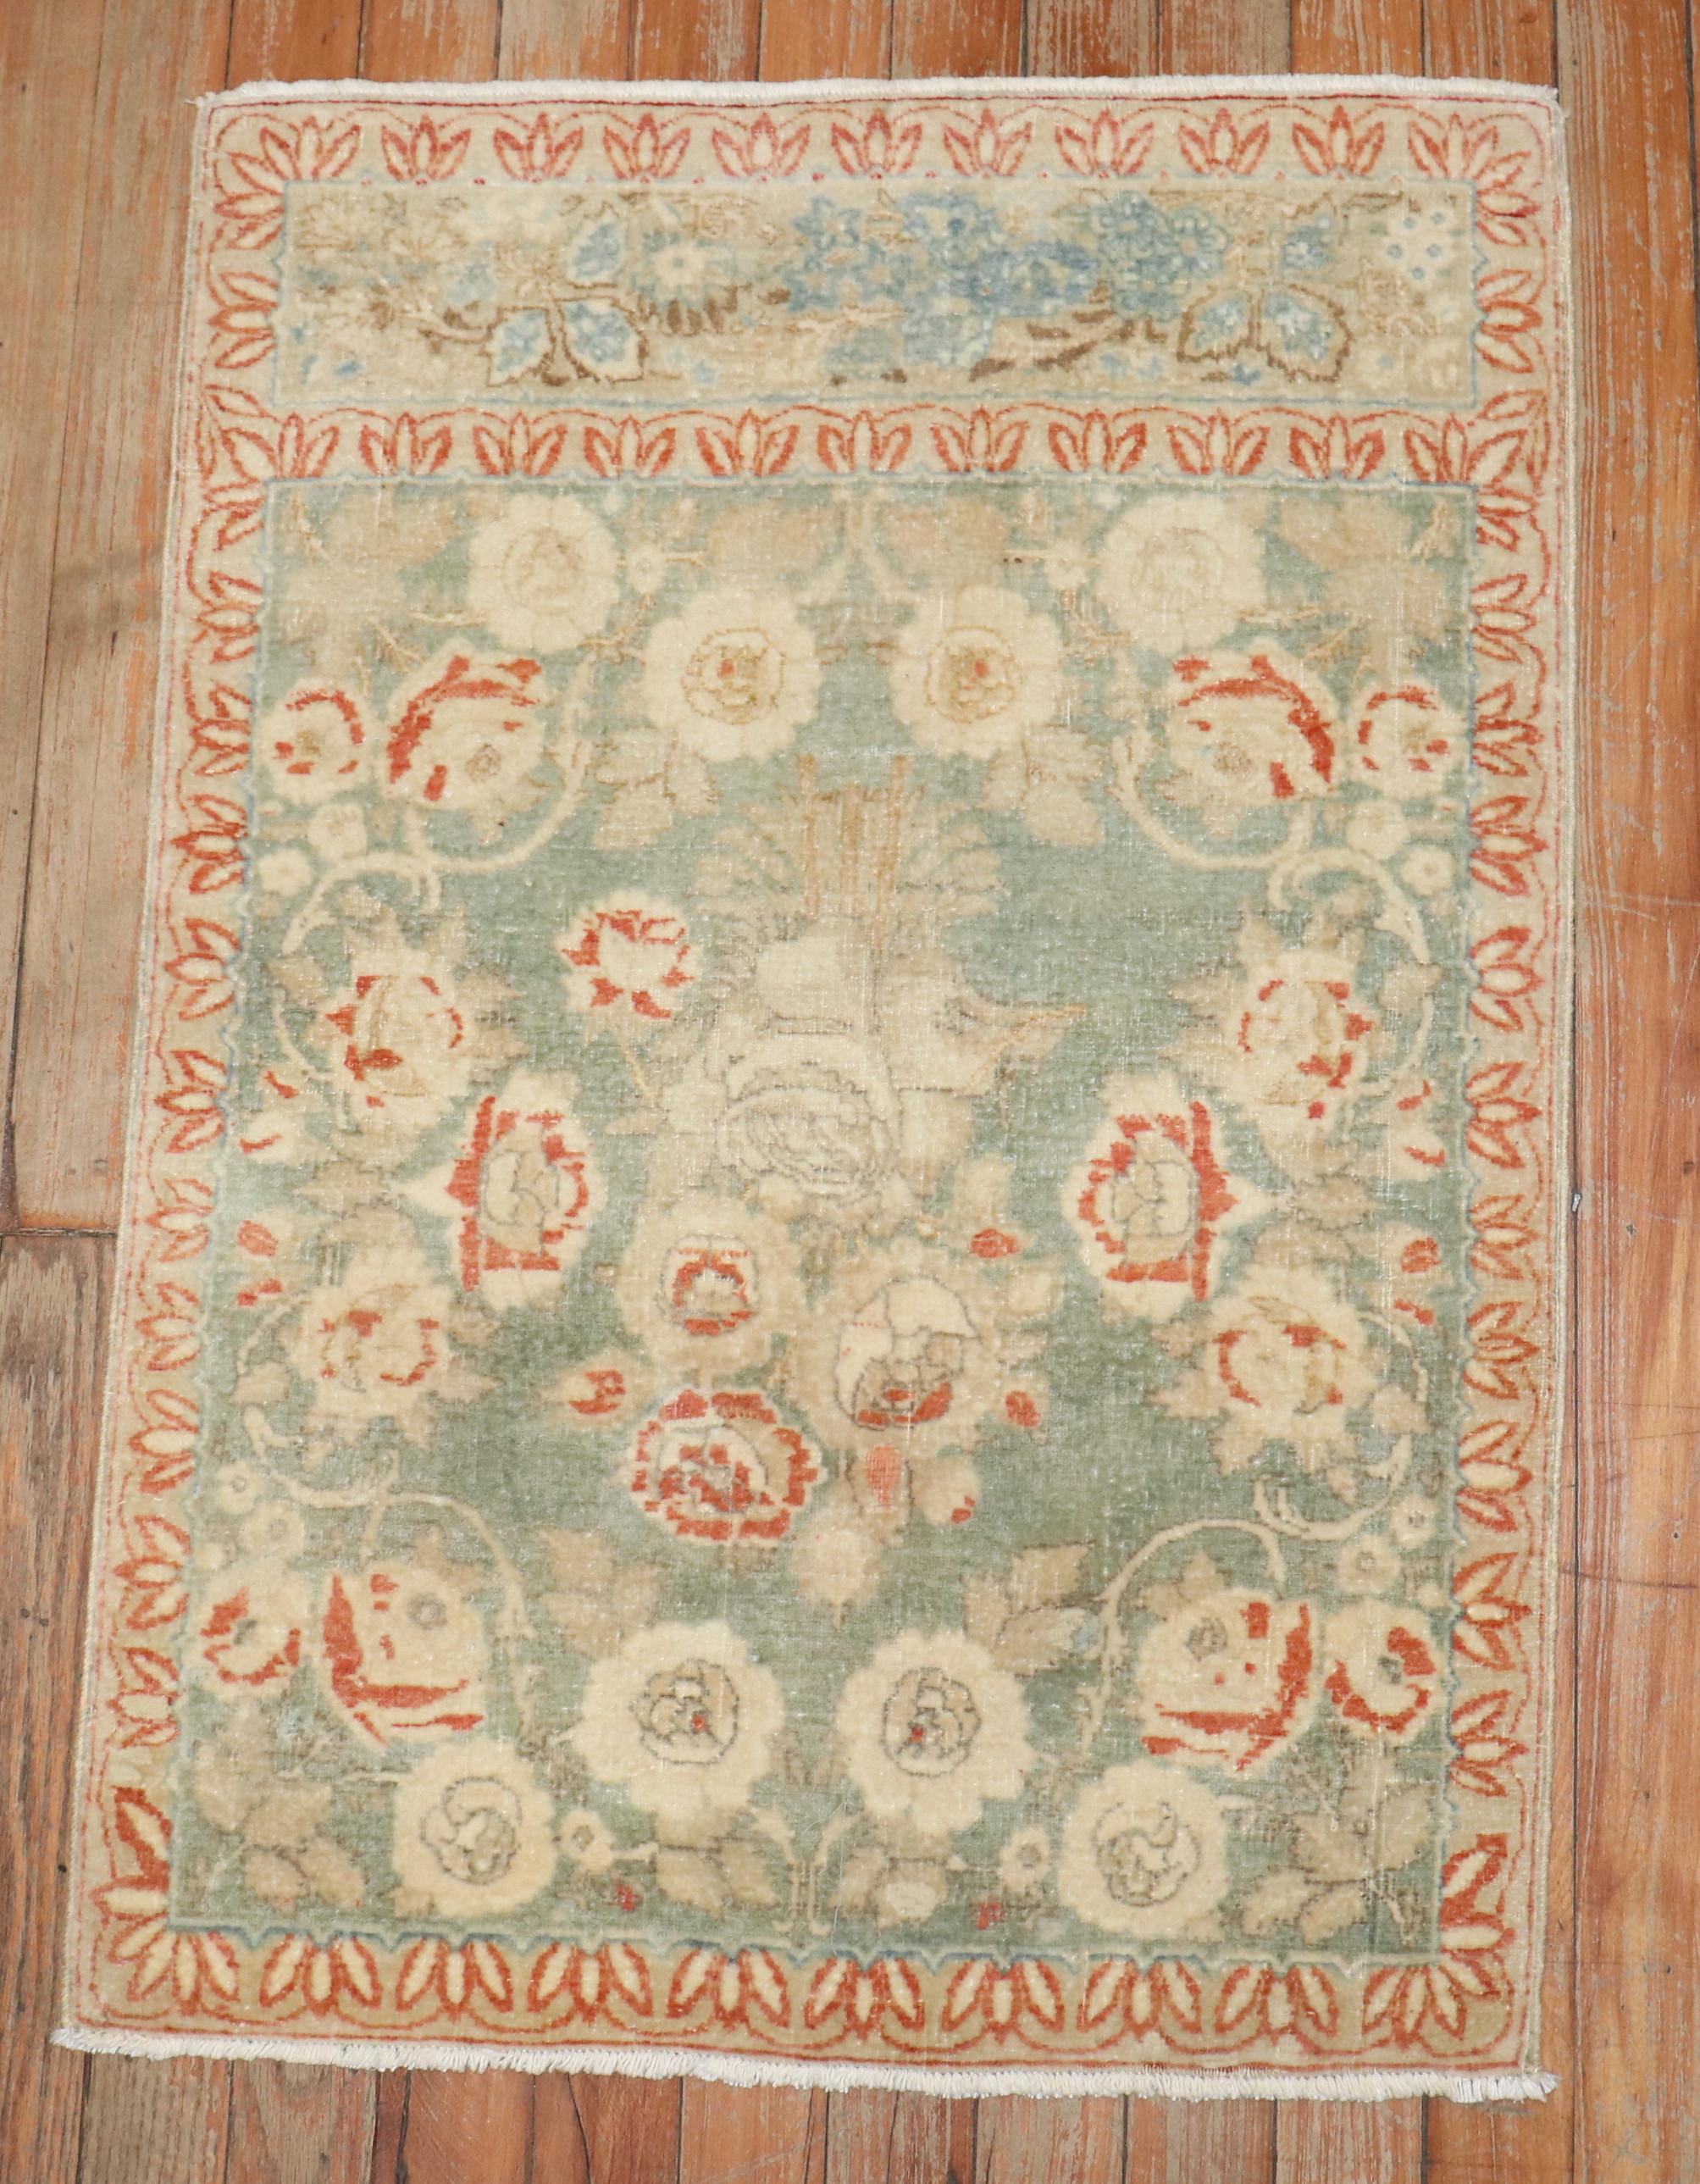 A fine quality mat size Persian Kashan small square mini rug from the 1930s

Measures: 1'11